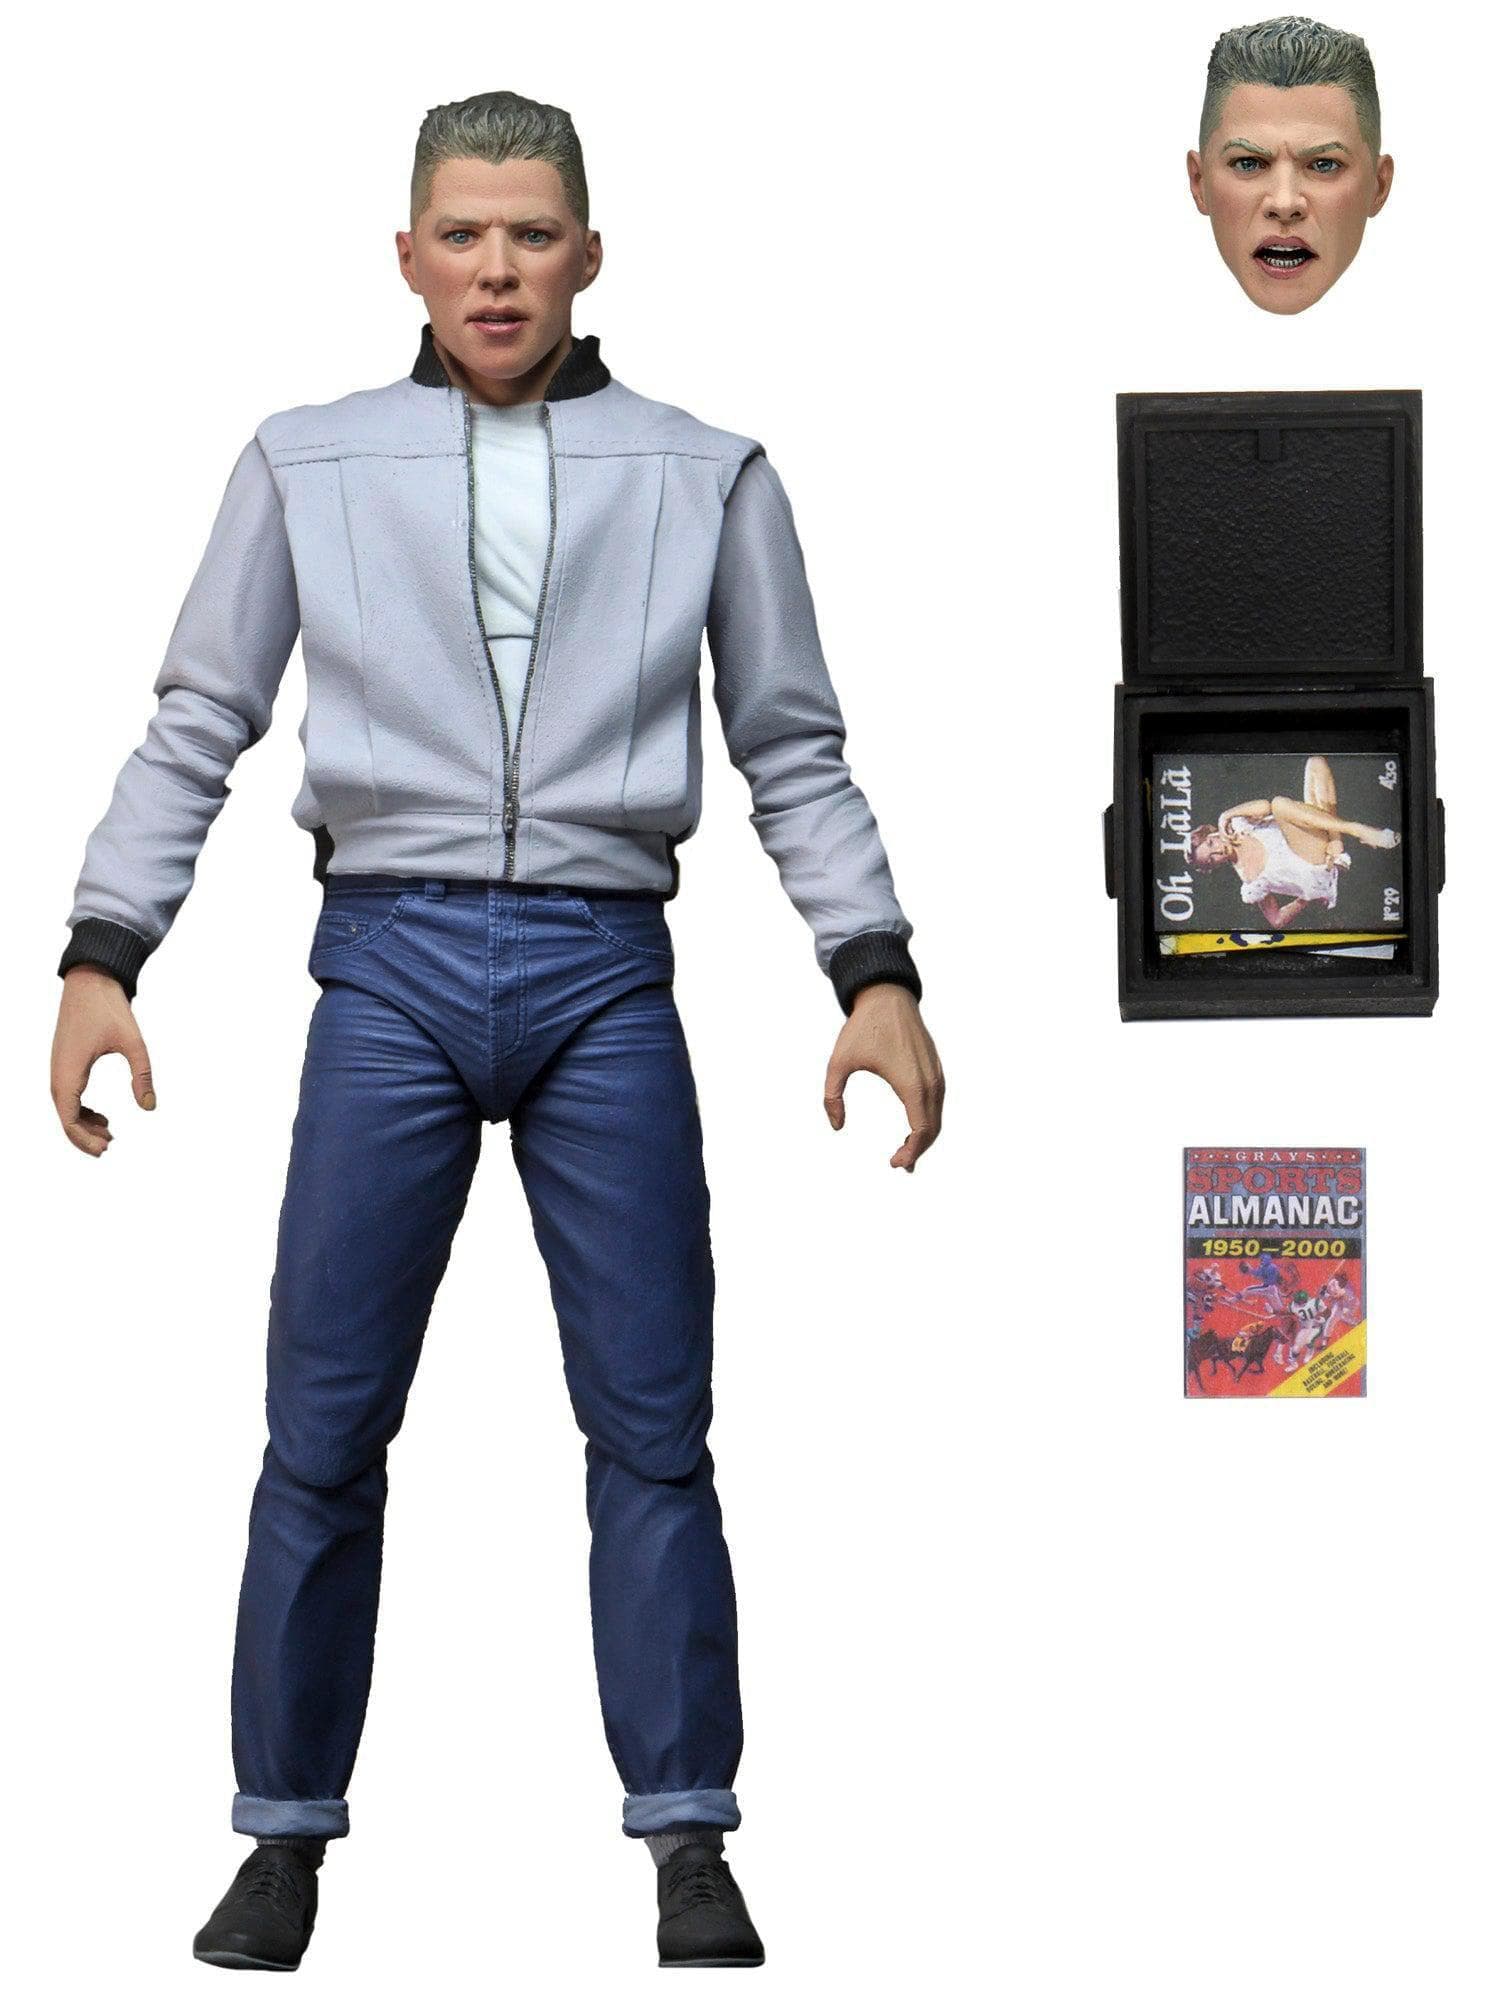 NECA - Back to the Future - 7" Scale Action Figure - Ultimate Biff - costumes.com